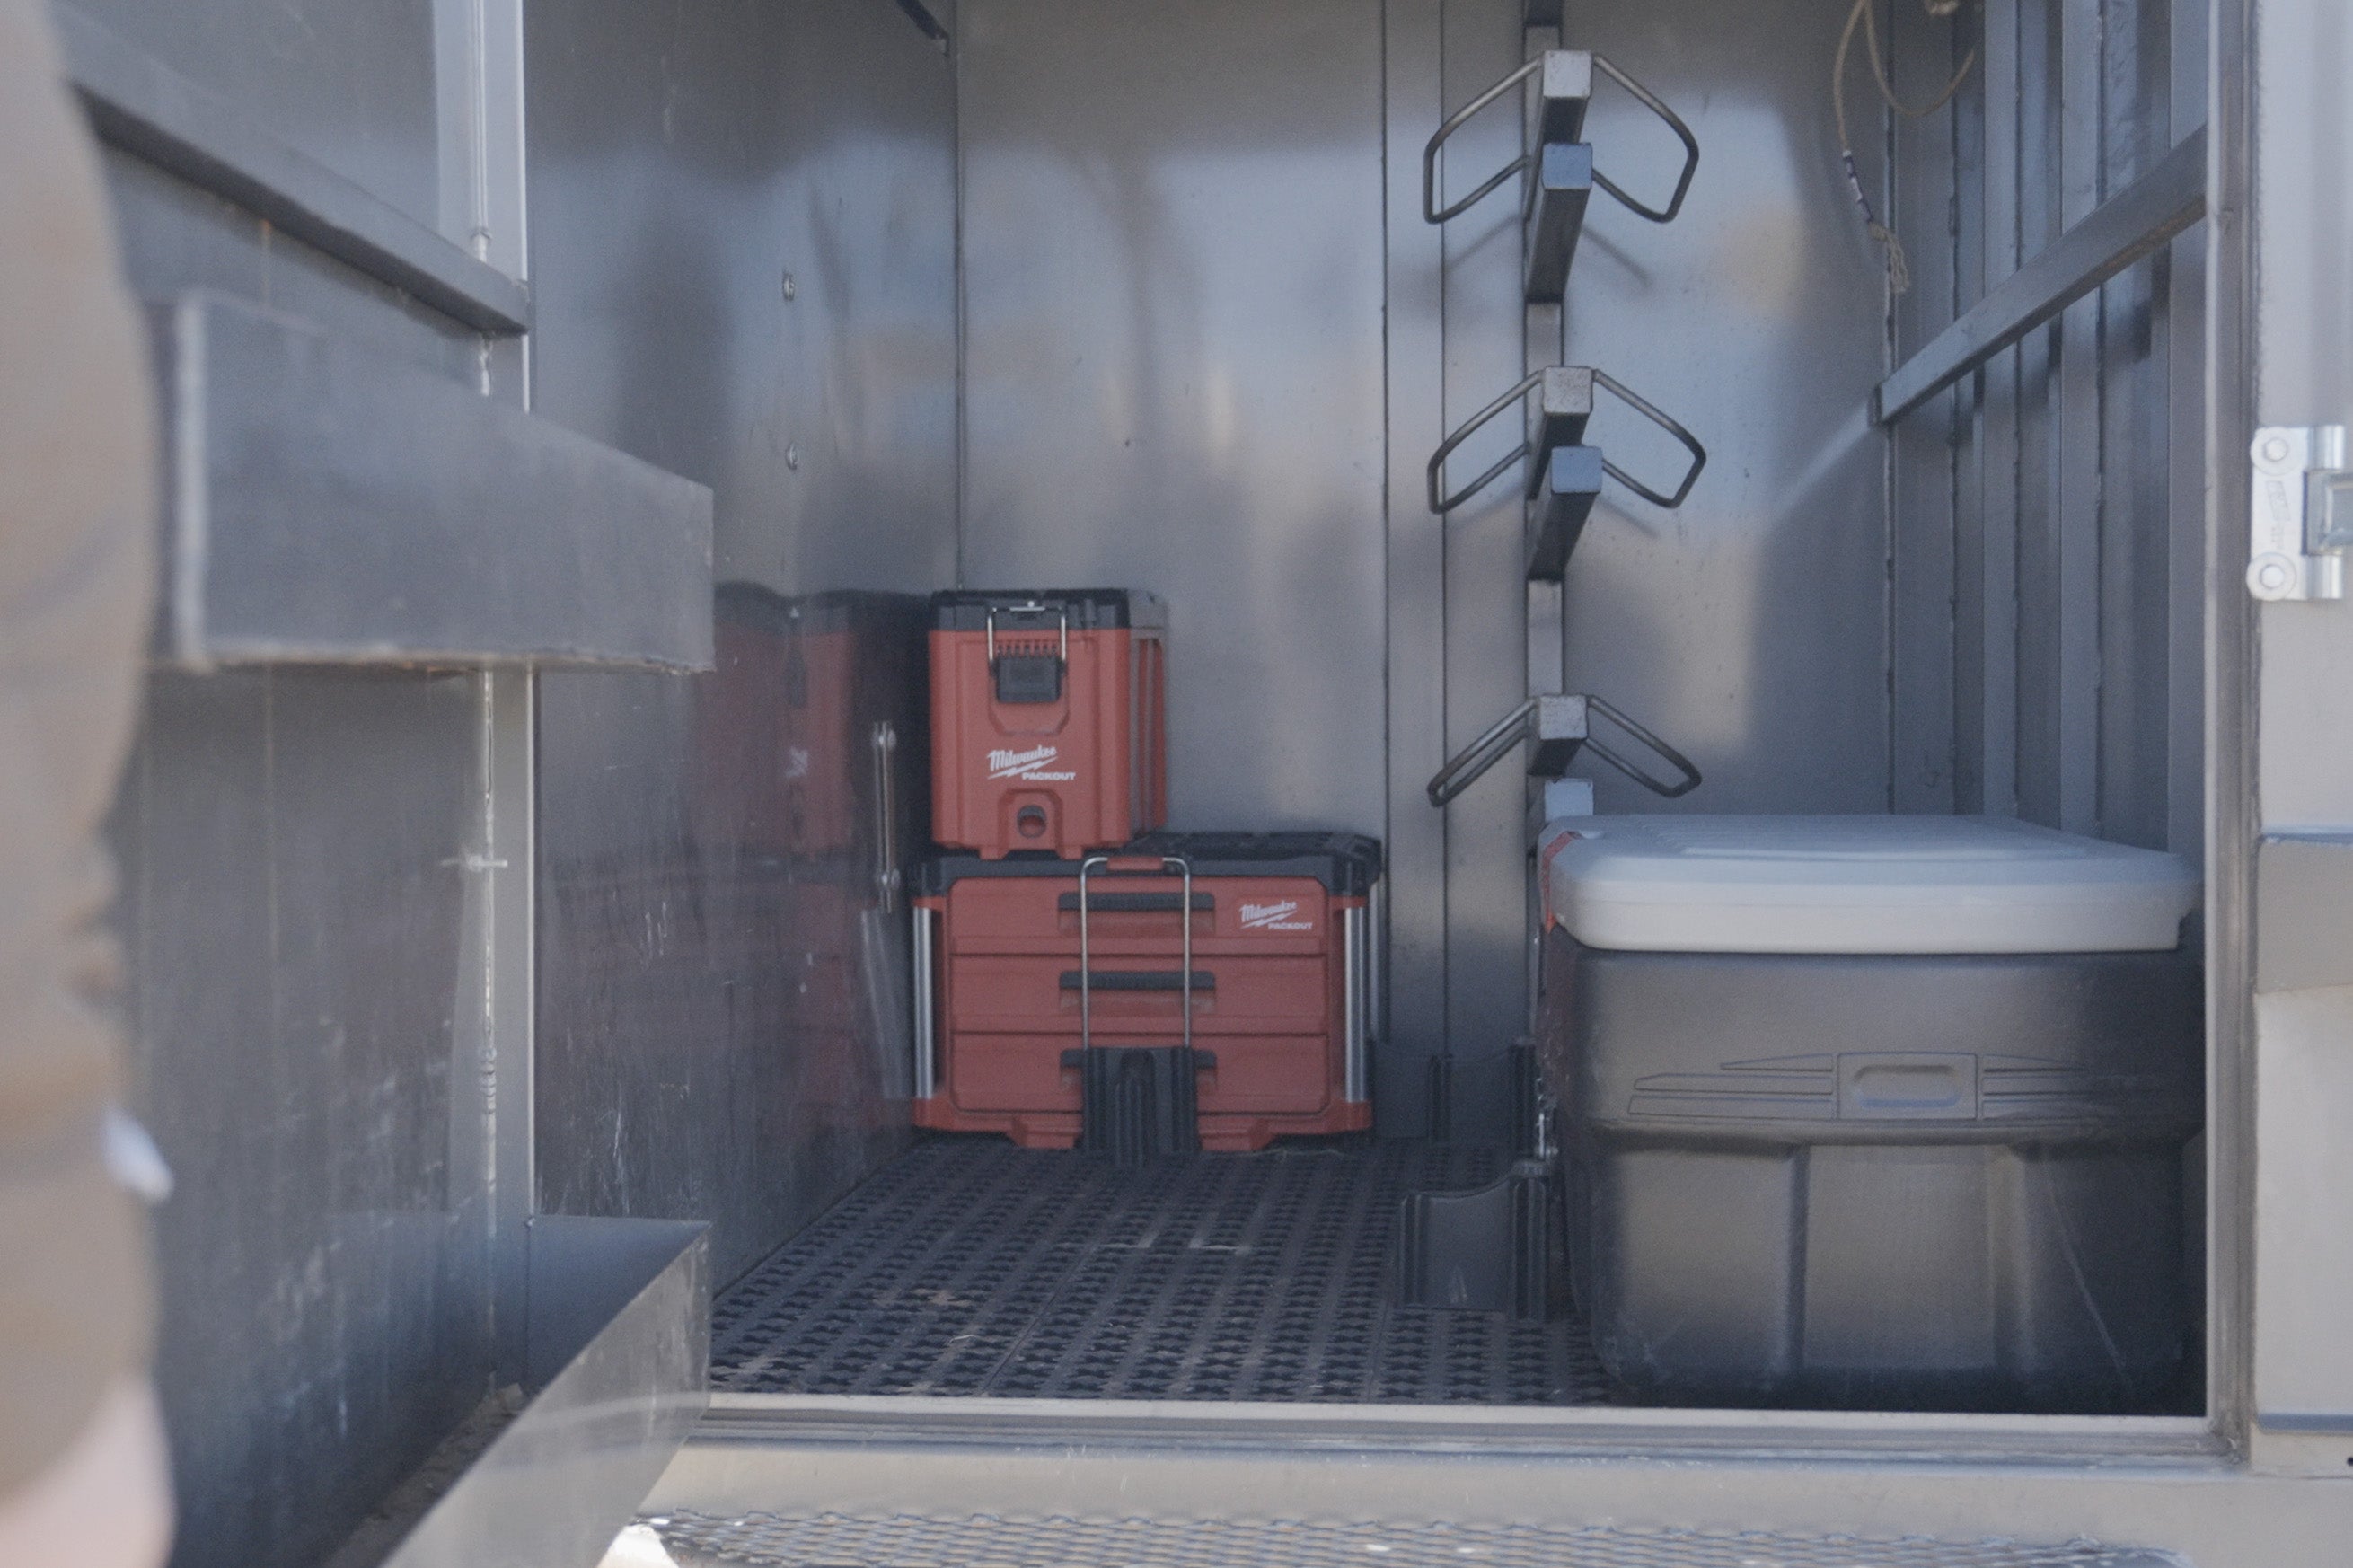 Tmat installed into the tac room with red Packout tool boxes and an ActionPacker container.